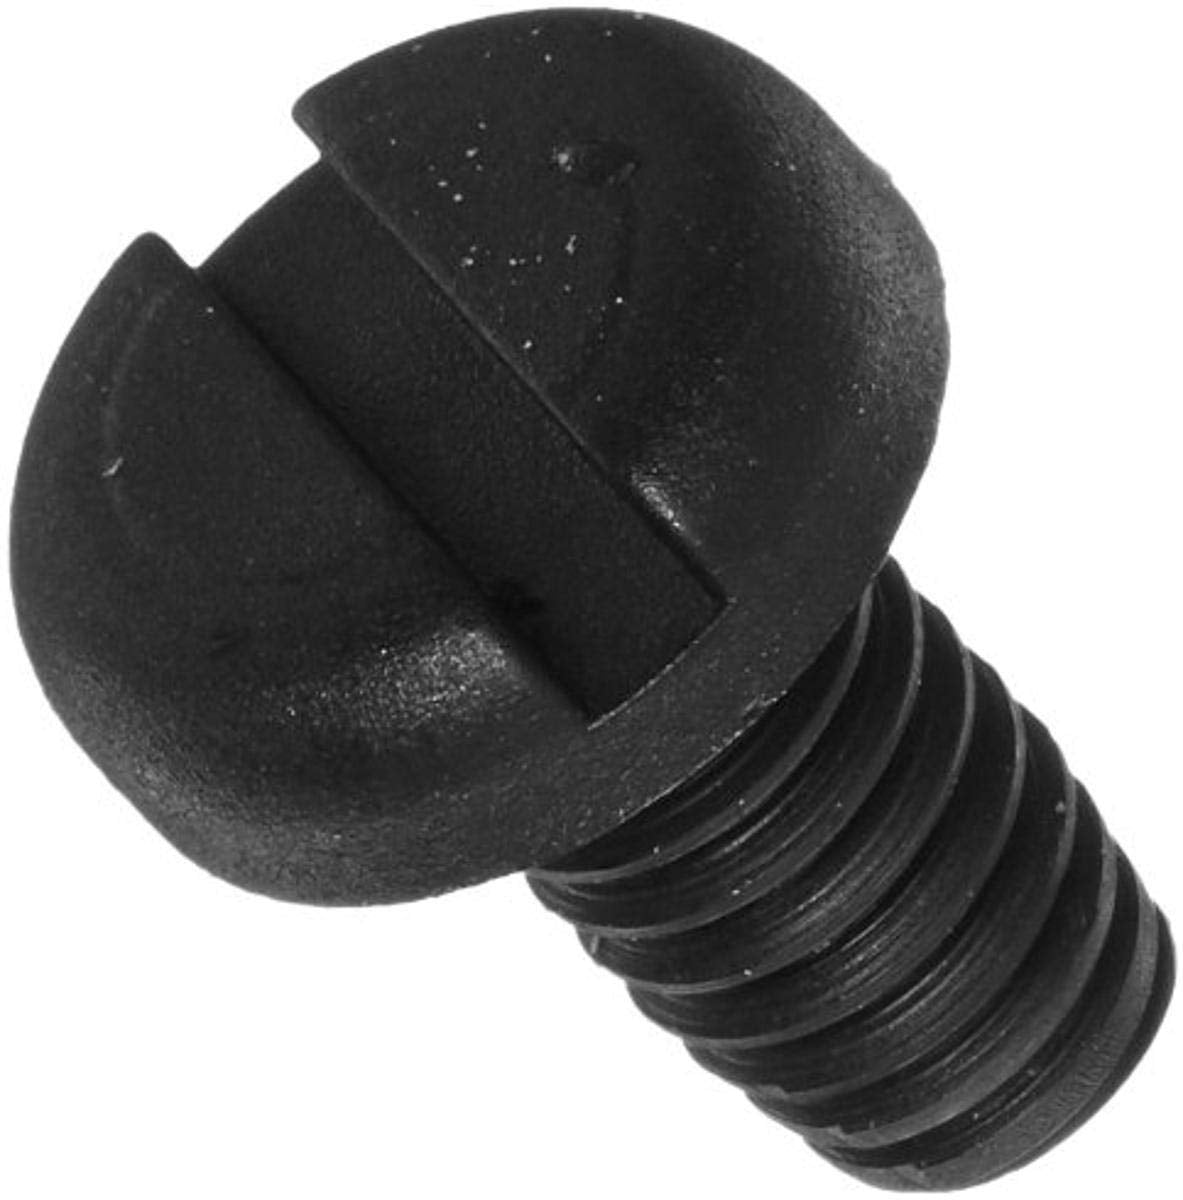 Black USA Made Fully Threaded #4-40 Thread Size Nylon 6/6 Pan Head Machine Screw 7/32 Length Slotted Drive Pack of 100 